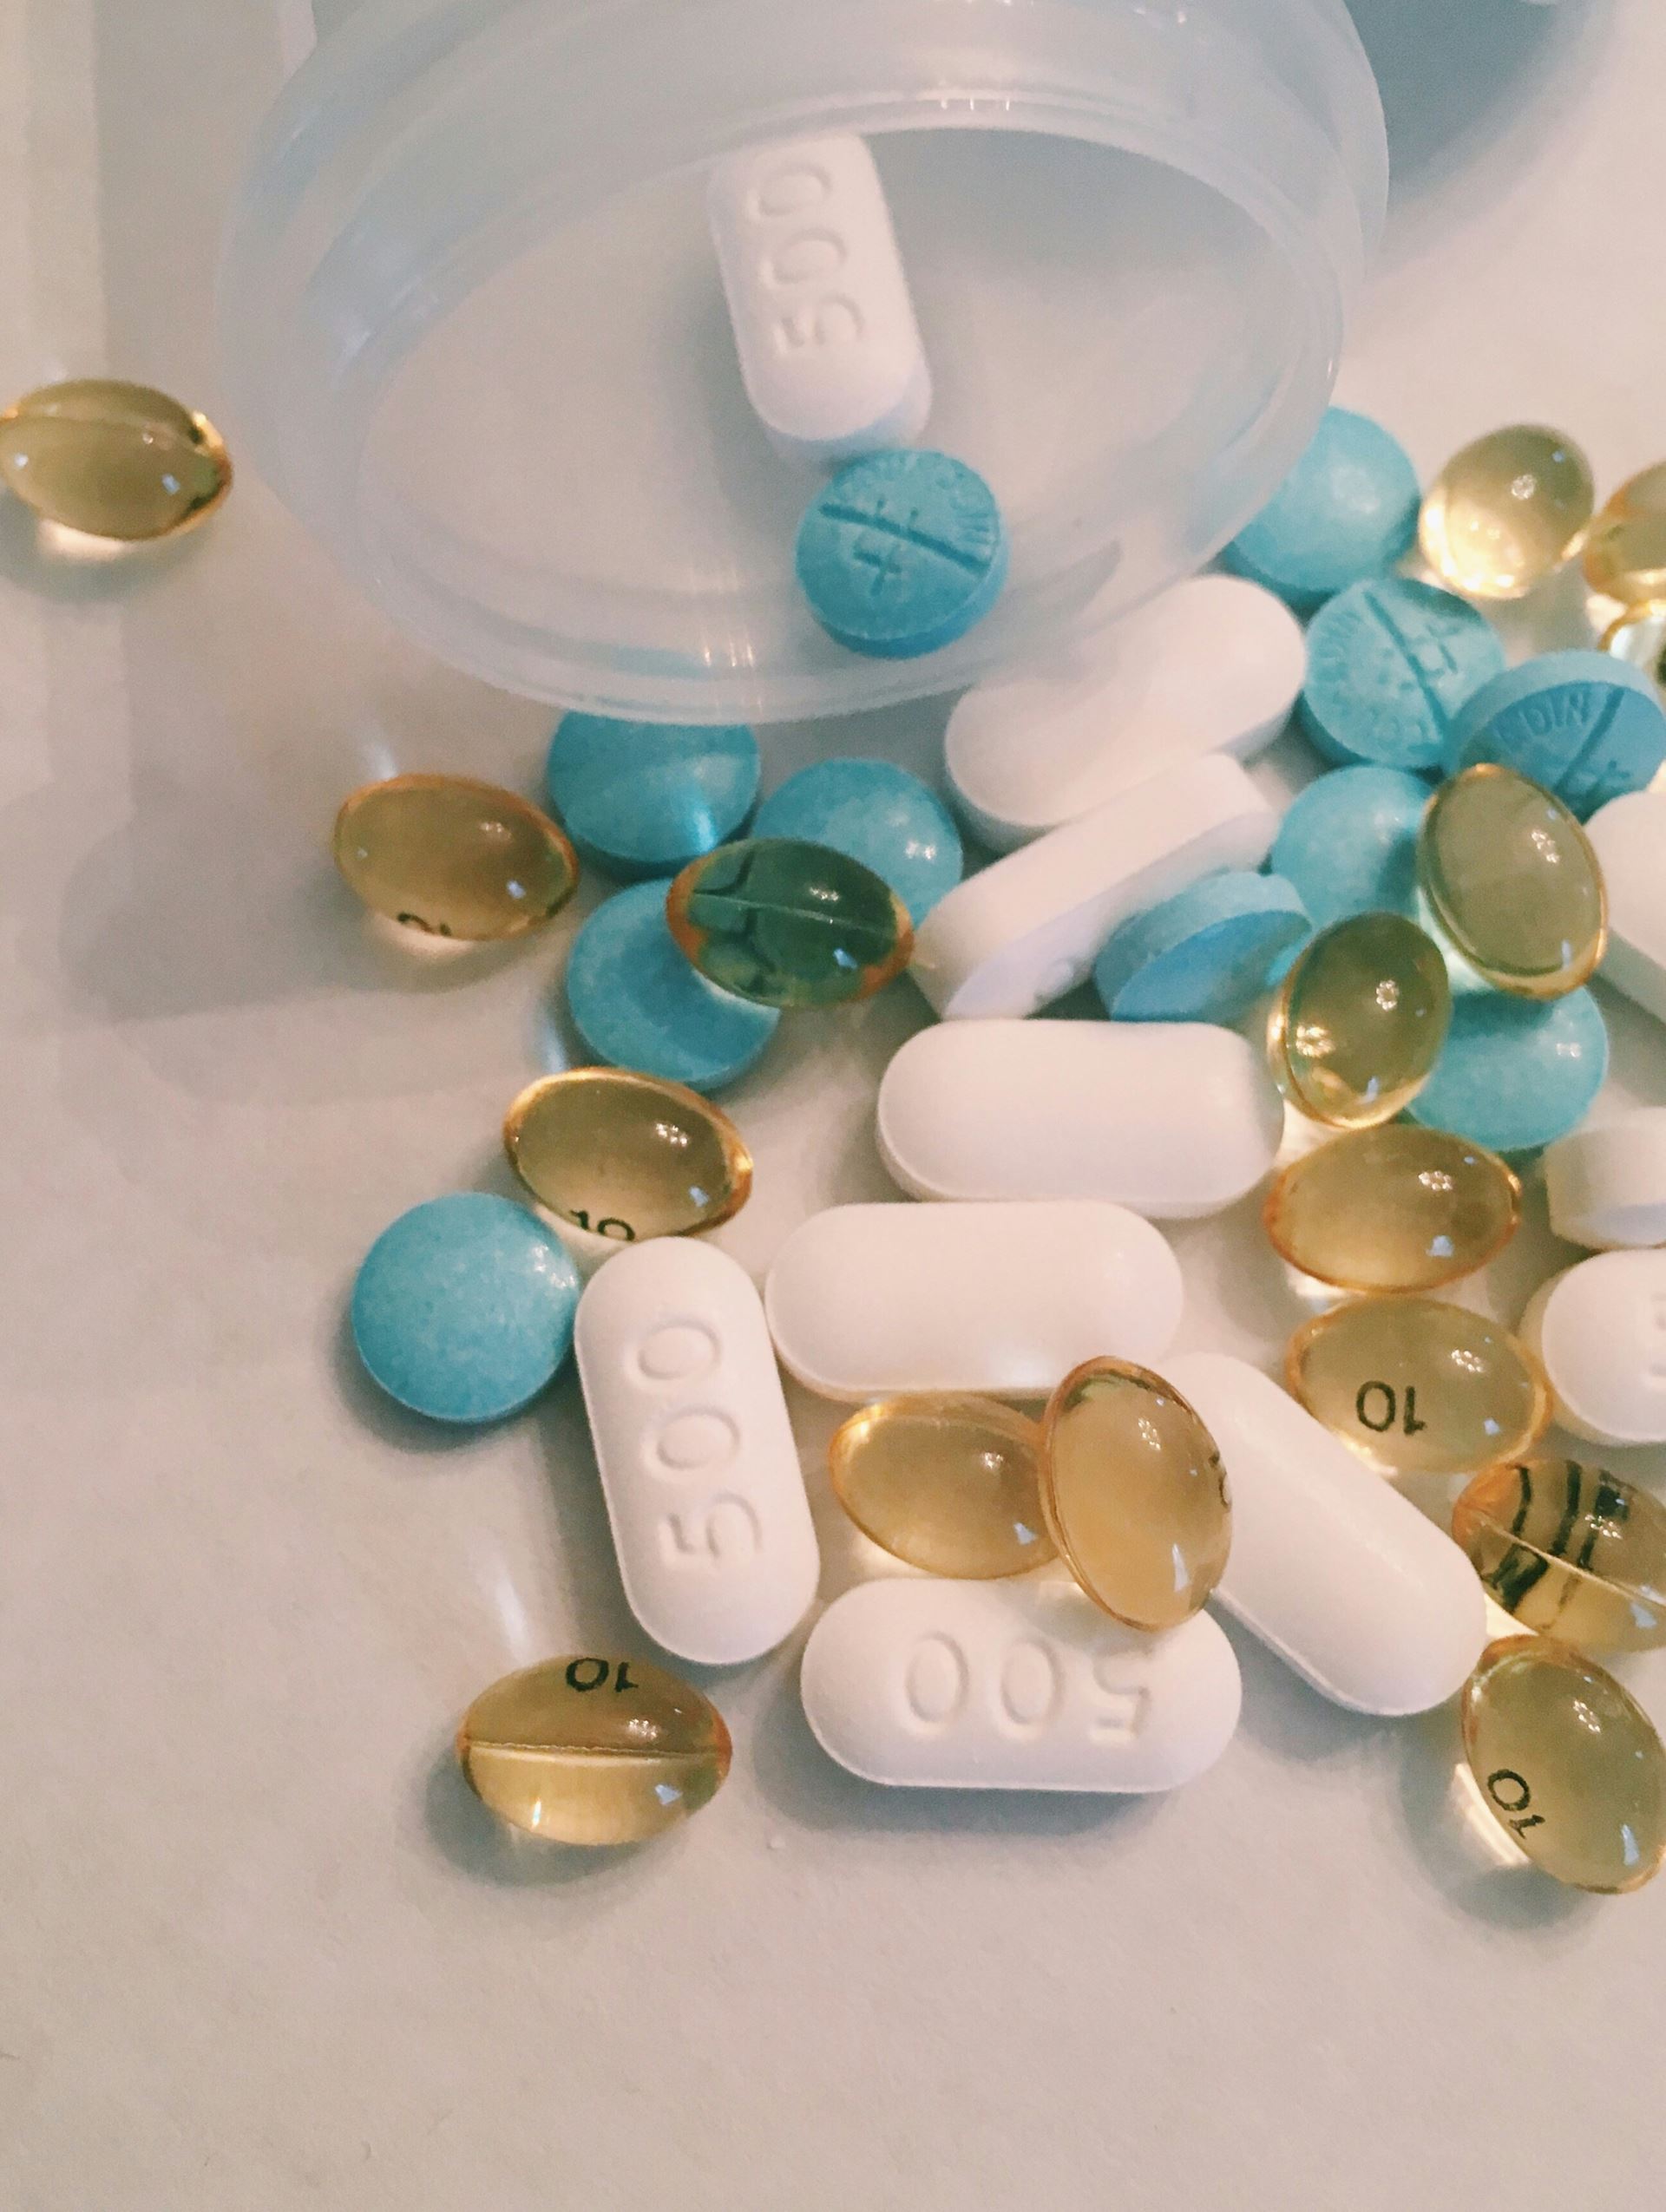 Pills on a table